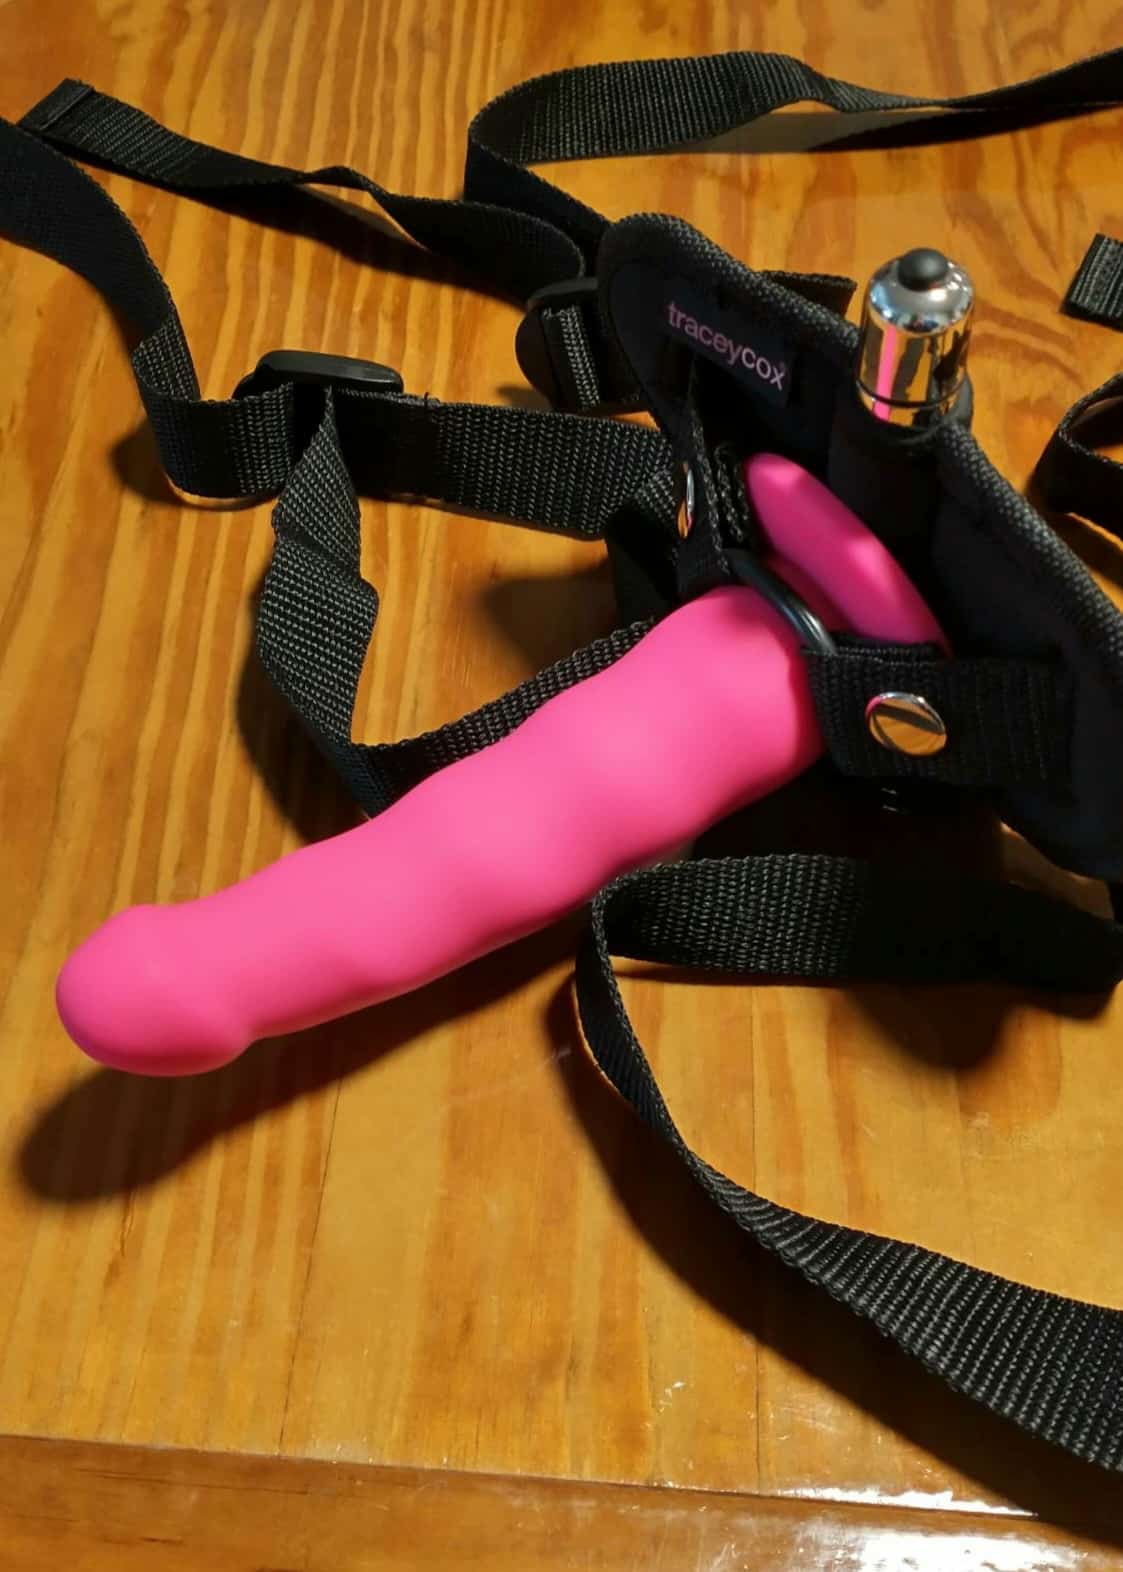 Tracey Cox Supersex Strap-On Pegging Kit (4 Piece). Slide 4